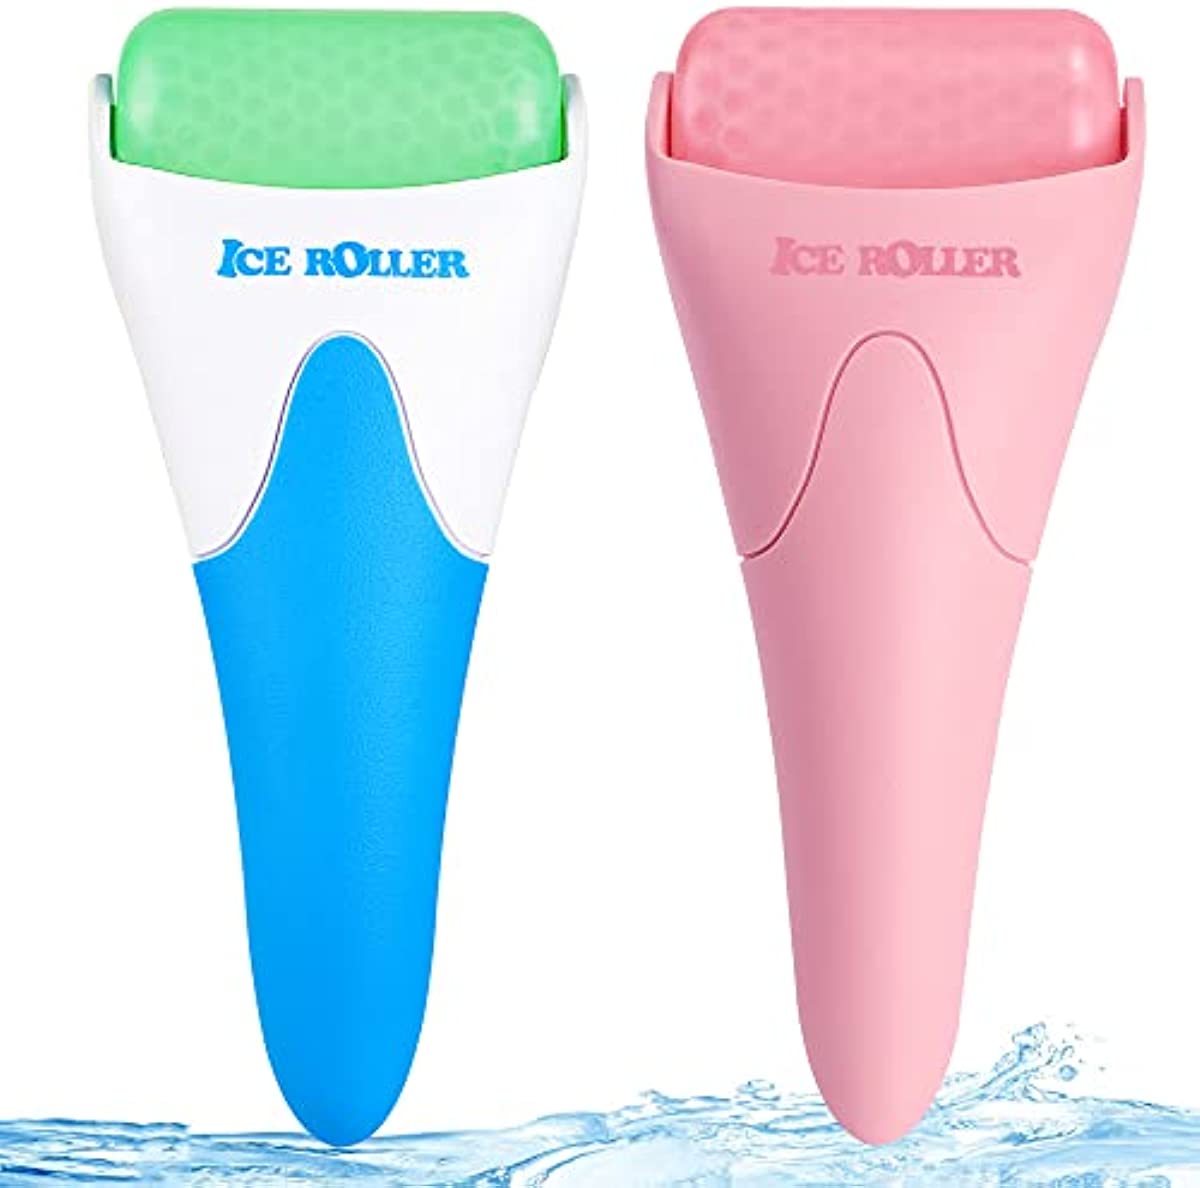 2 Pack Ice Rollers for Face, Eyes and Whole Body Relief, Face Roller Skin Care Tool for Migraine Relief and Blood Circulation (Green+Pink)